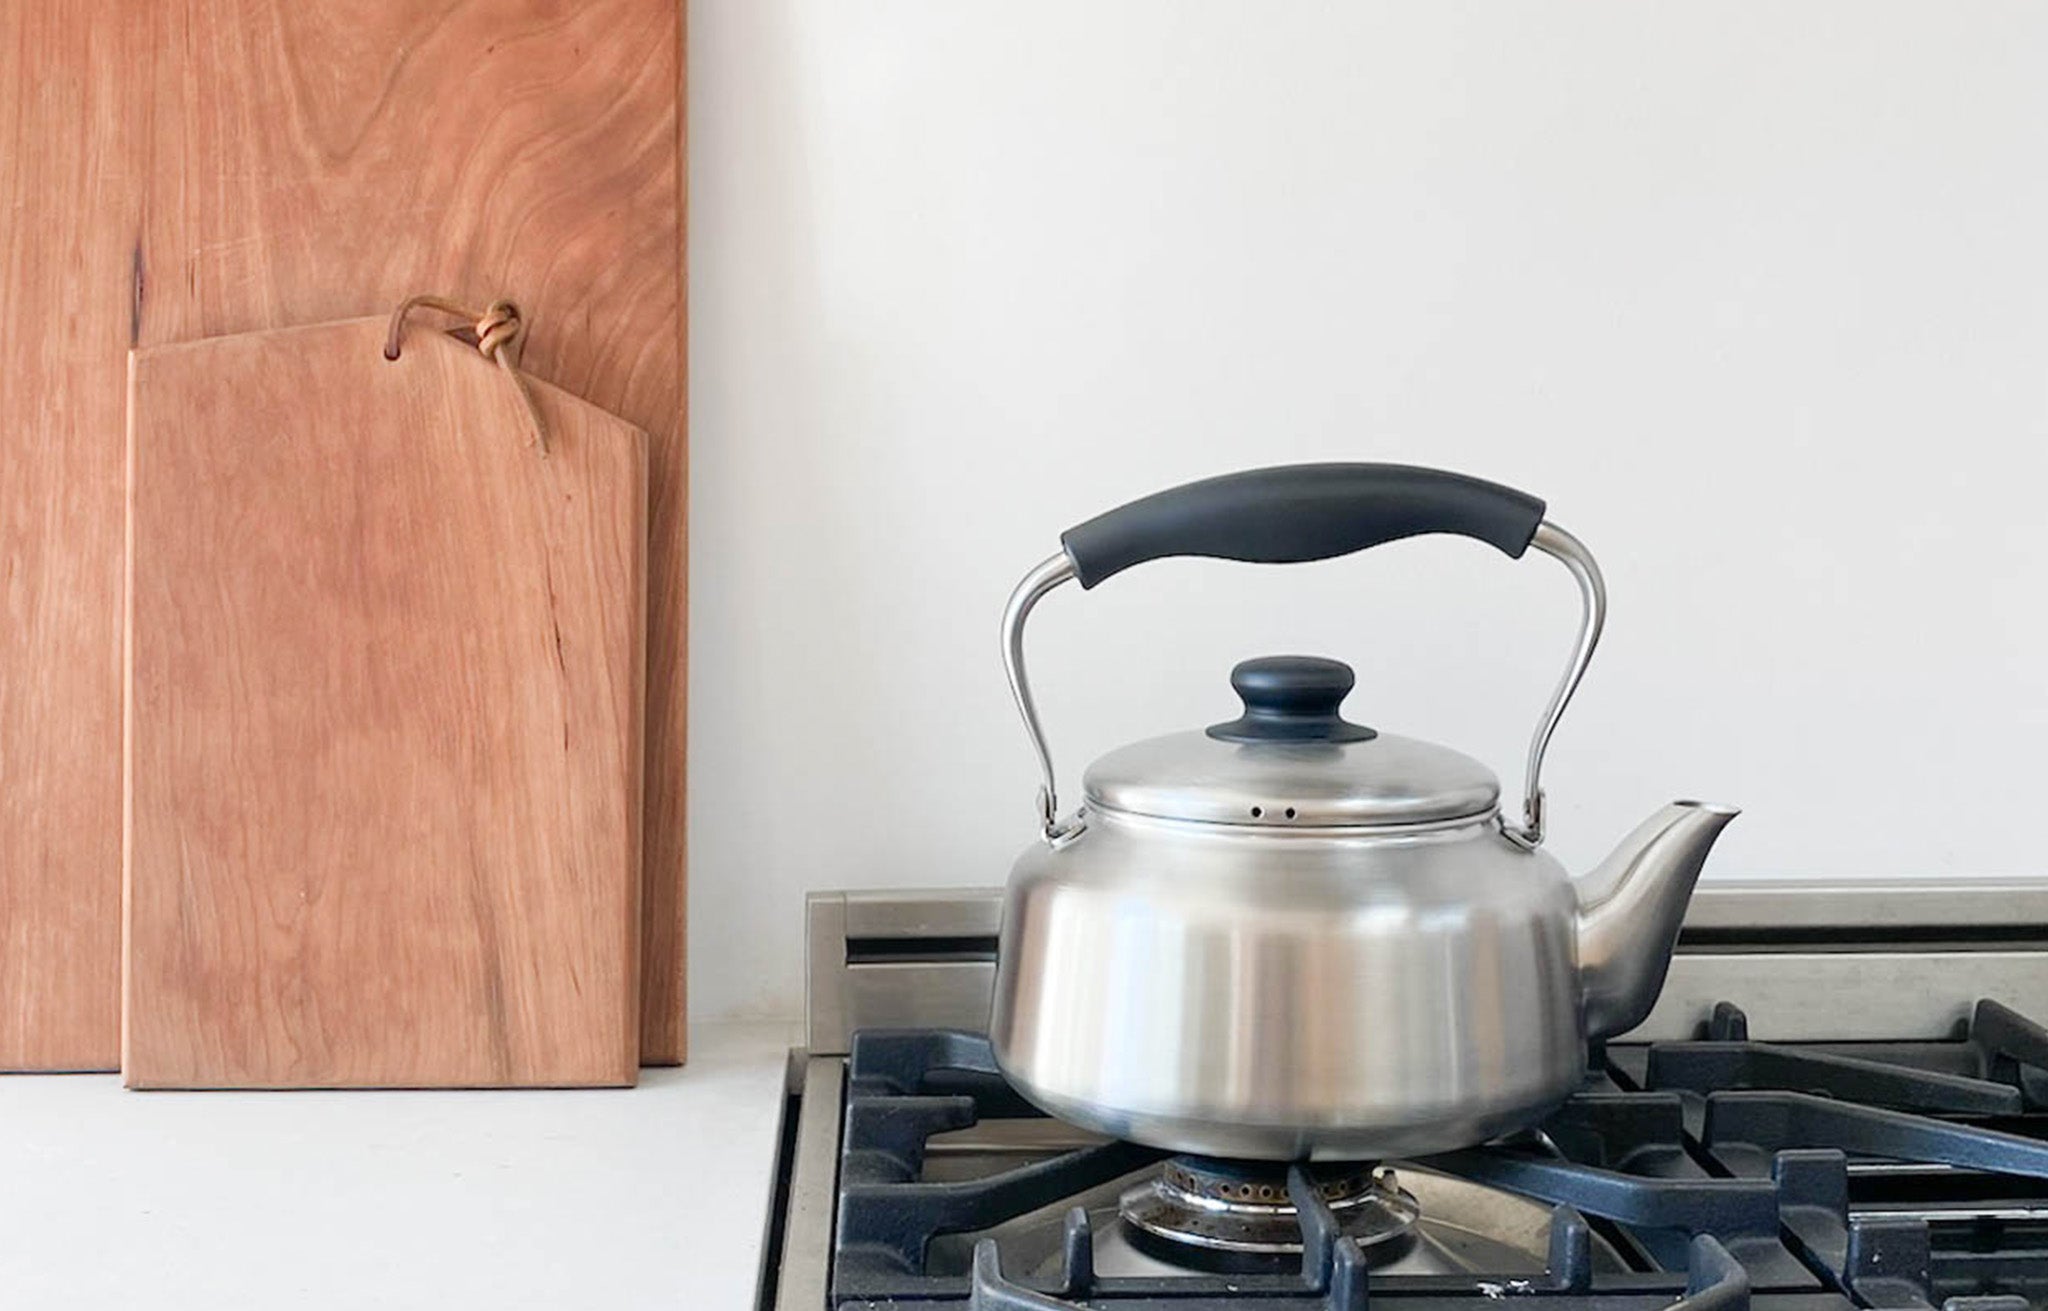 Stainless Kettle on stove close up | lifestyle